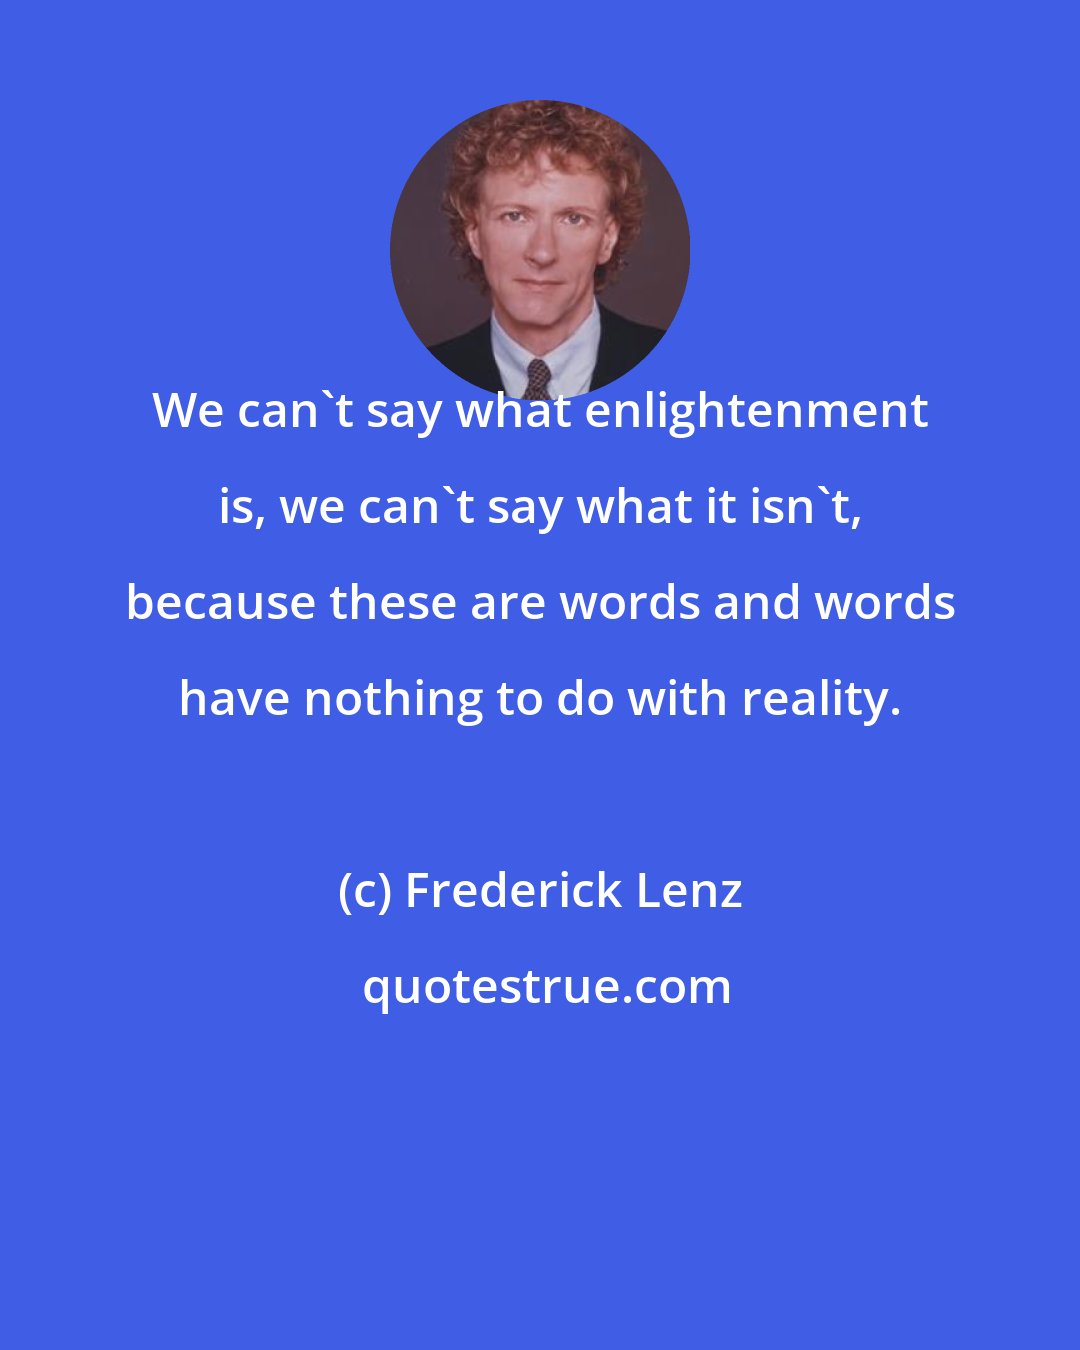 Frederick Lenz: We can't say what enlightenment is, we can't say what it isn't, because these are words and words have nothing to do with reality.